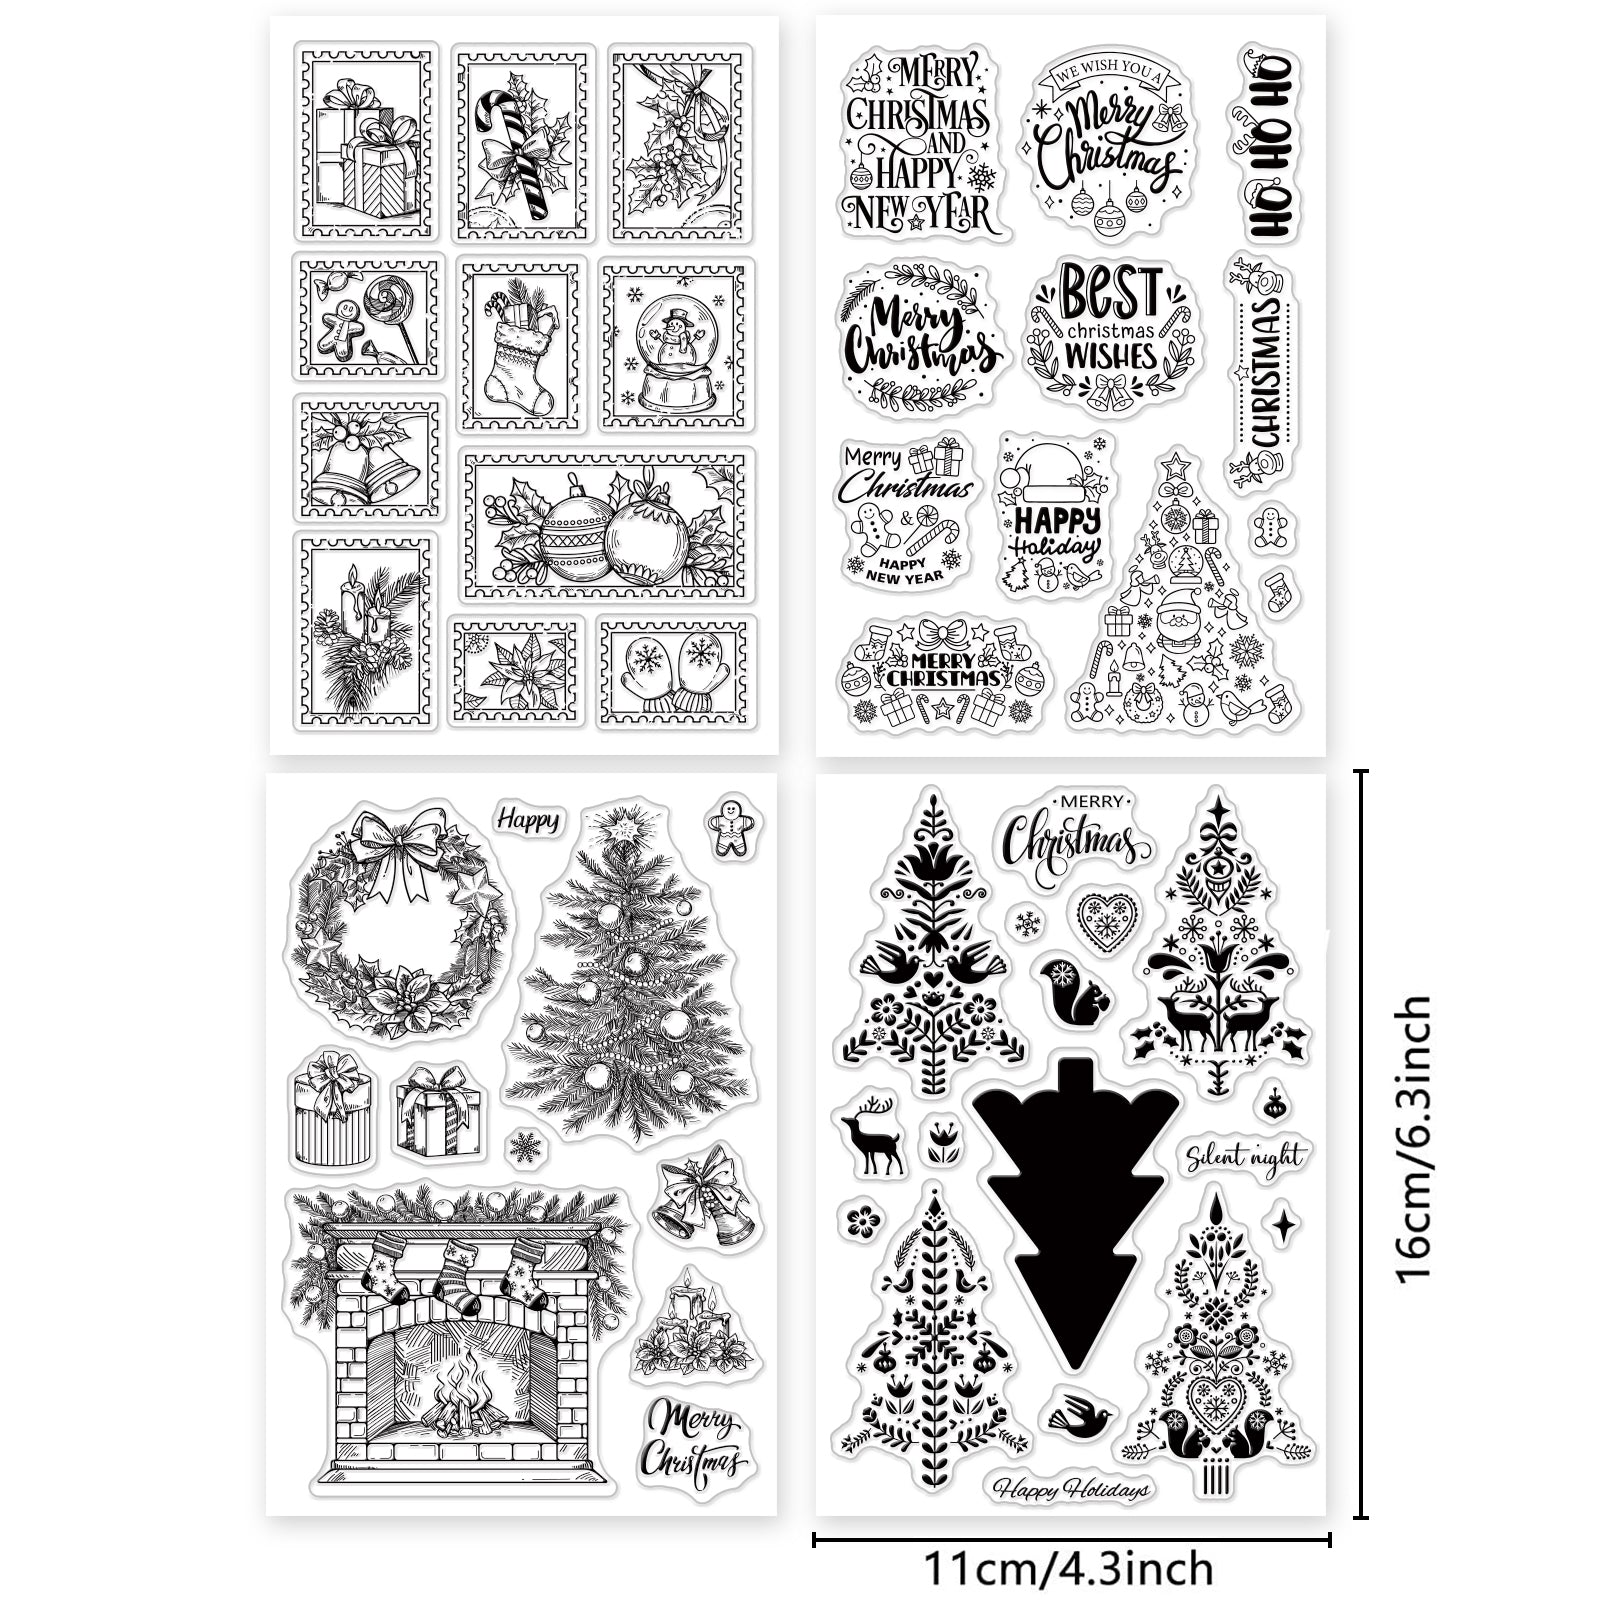 Globleland Christmas Tree, Christmas Greetings, Christmas Fireplace, Folk Art Clear Silicone Stamp Seal for Card Making Decoration and DIY Scrapbooking